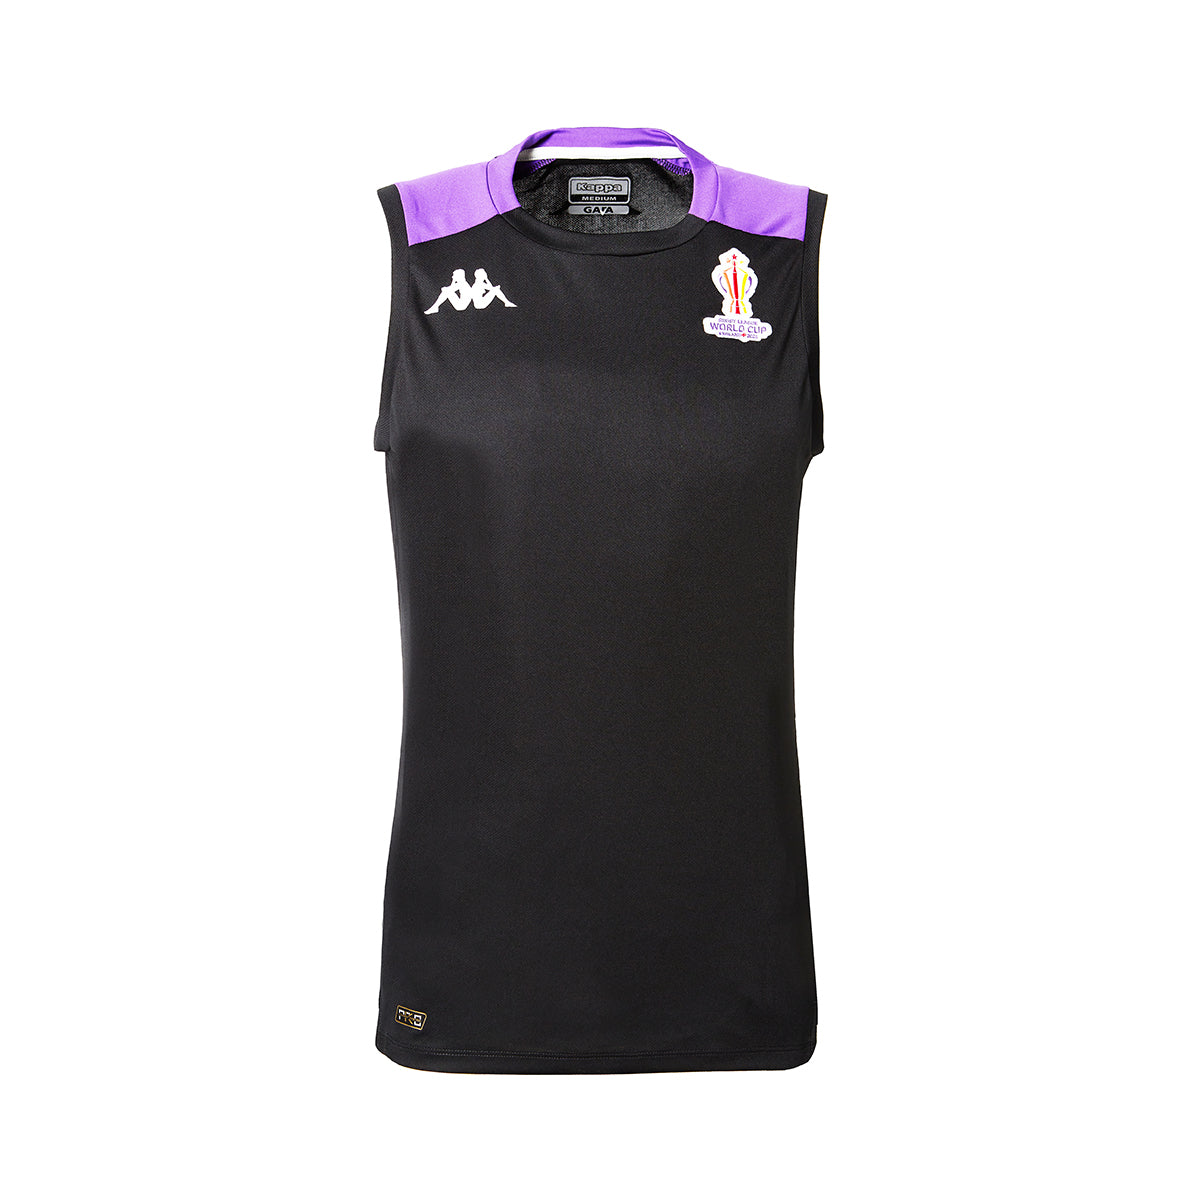 Maillot Abriz Pro 5 Rugby World Cup Noir homme - image 1